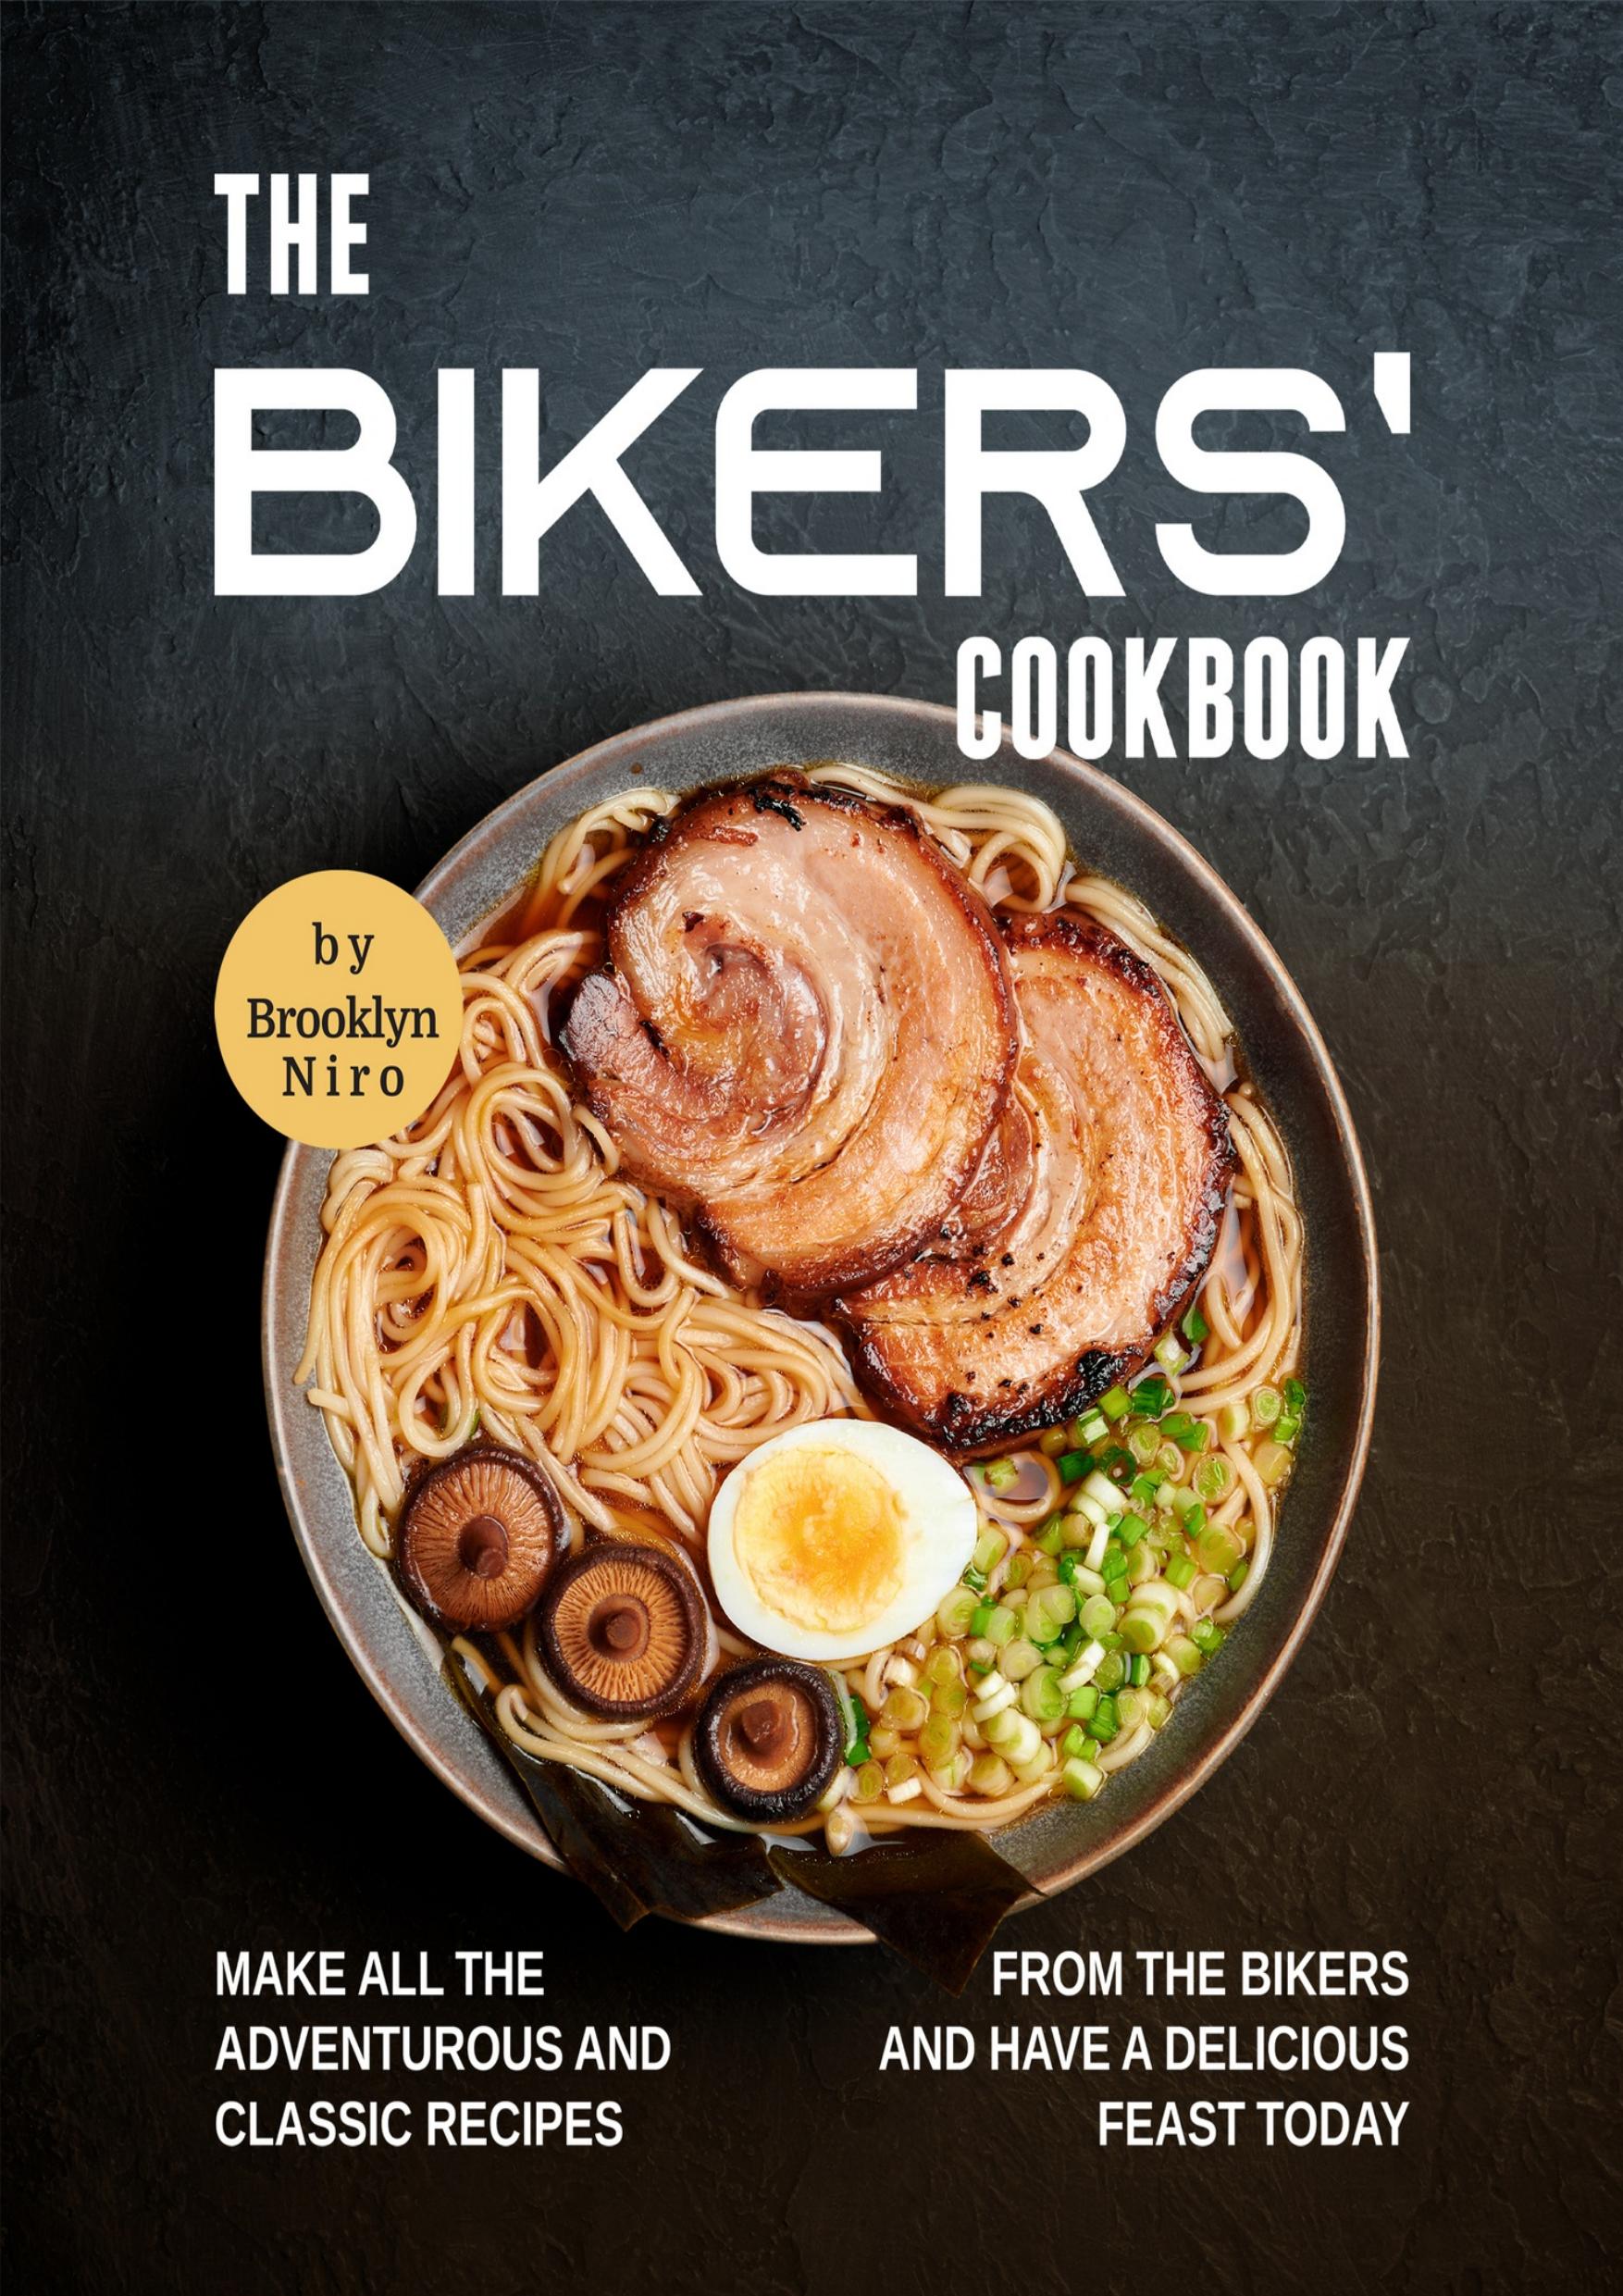 The Bikers' Cookbook: Make All the Adventurous and Classic Recipes from the Bikers and Have a Delicious Feast Today by Niro Brooklyn